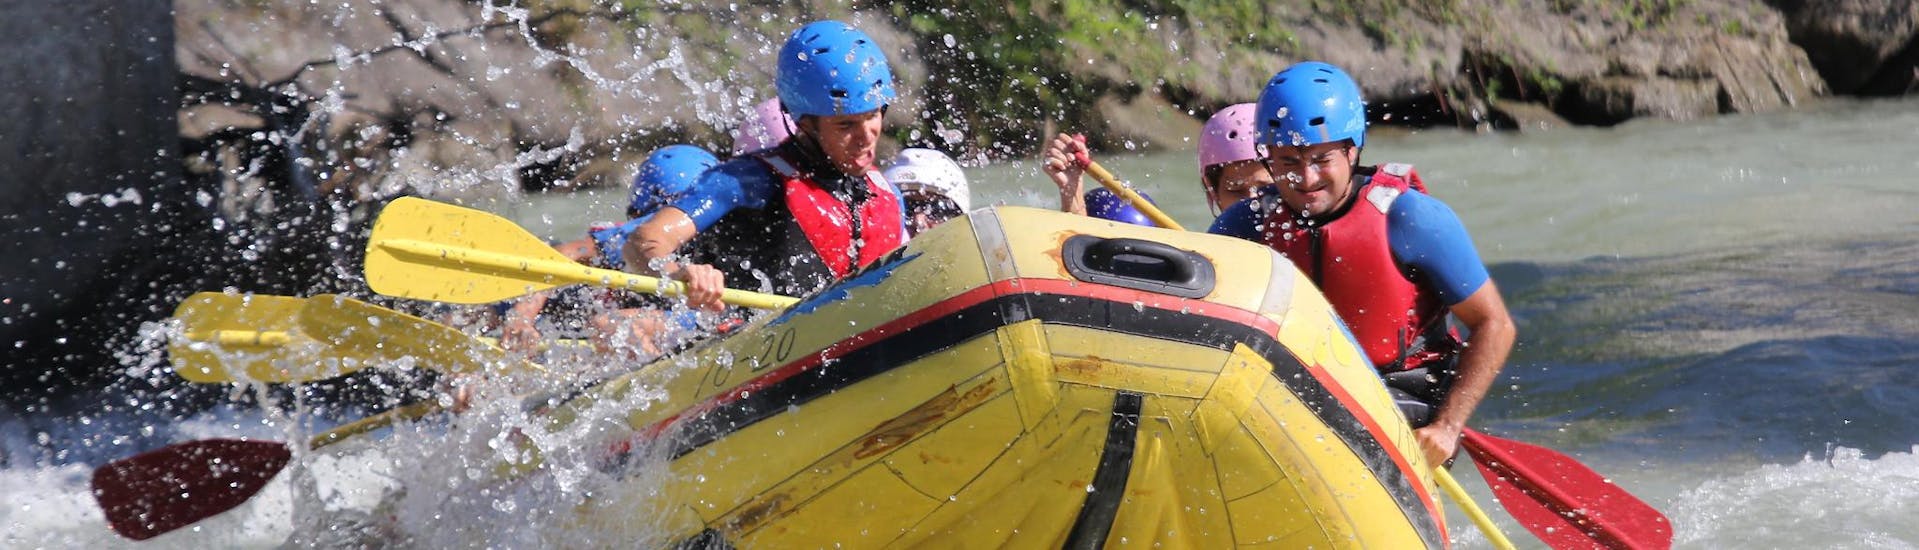 Rafting on the Adda for Groups 8+ People - Full Fun Tour.